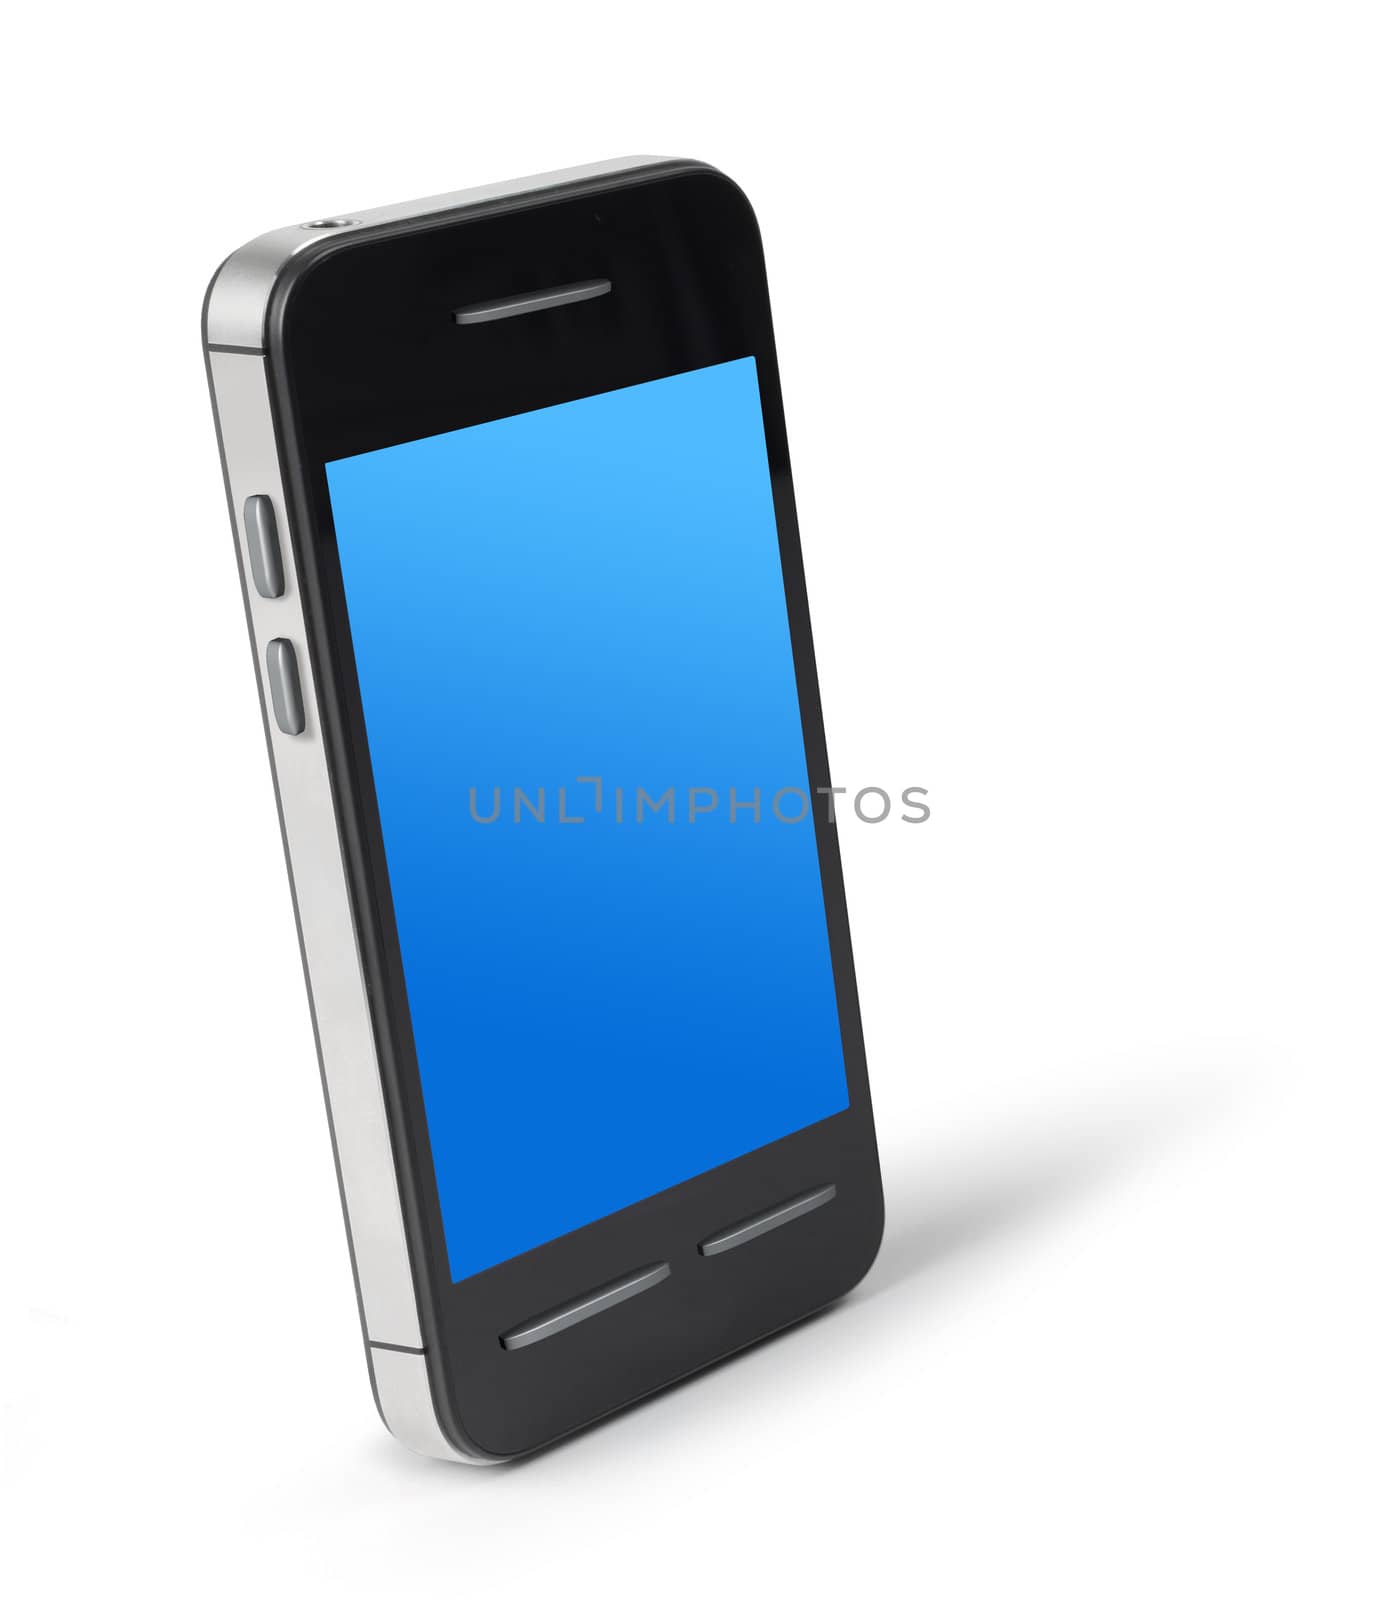 Modern touchscreen smartphone isolated on white background